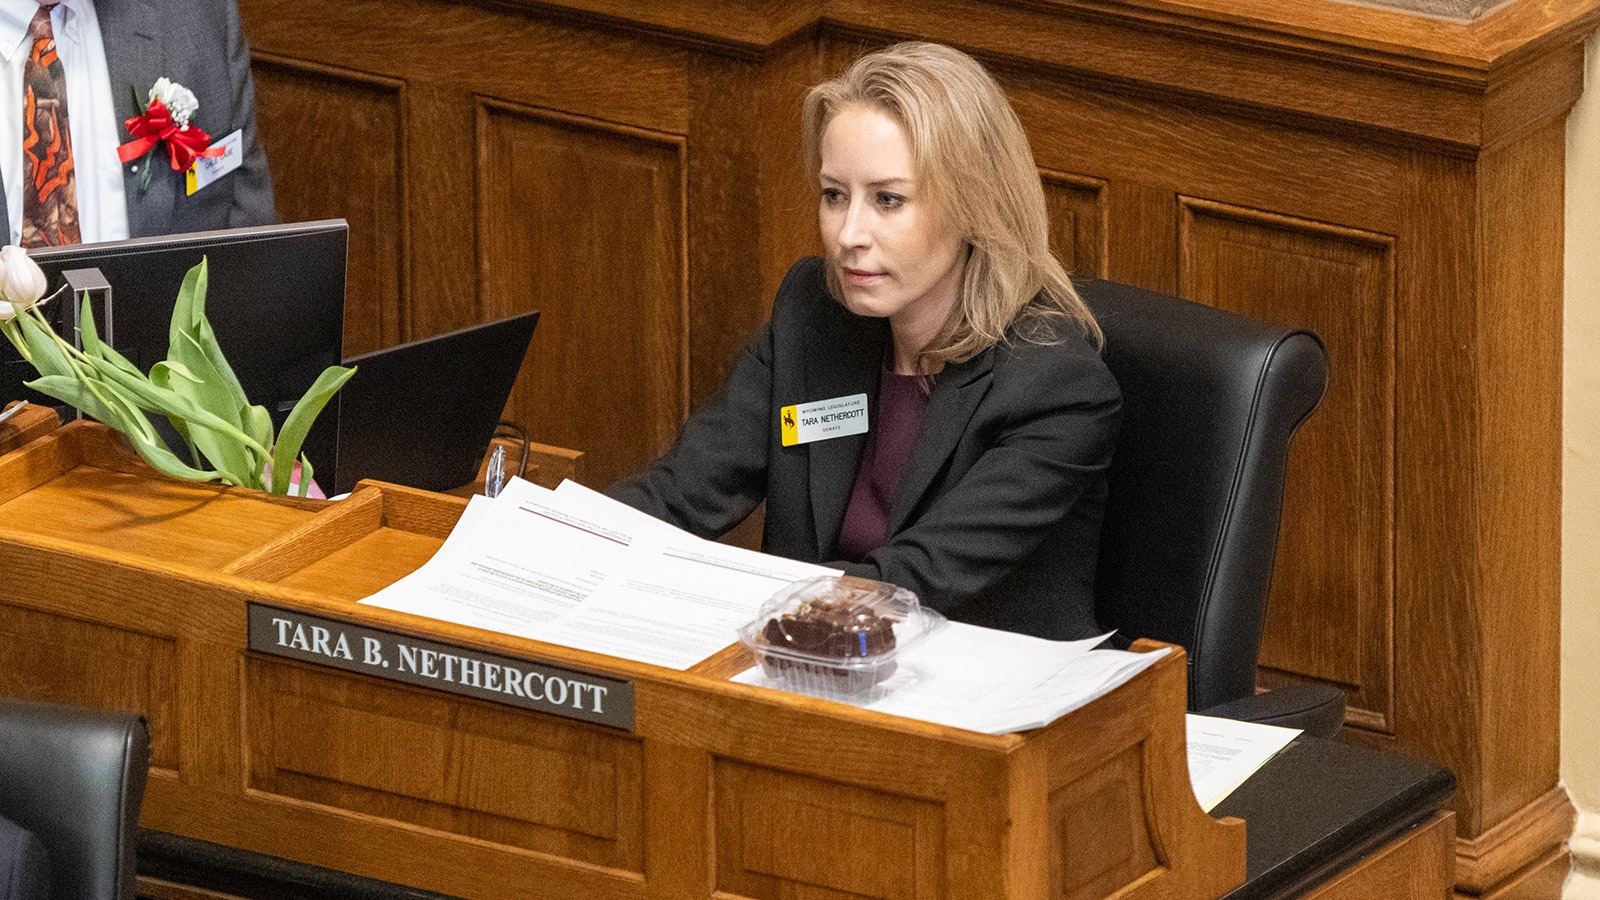 Sen. Tara Nethercott was removed as chair of the Appropriations Committee after the Senate on Monday voted to overturn Senate President Ogden Driskill's decision in the interim to remove Dave Kinskey as chairman and appoint Nethercott.